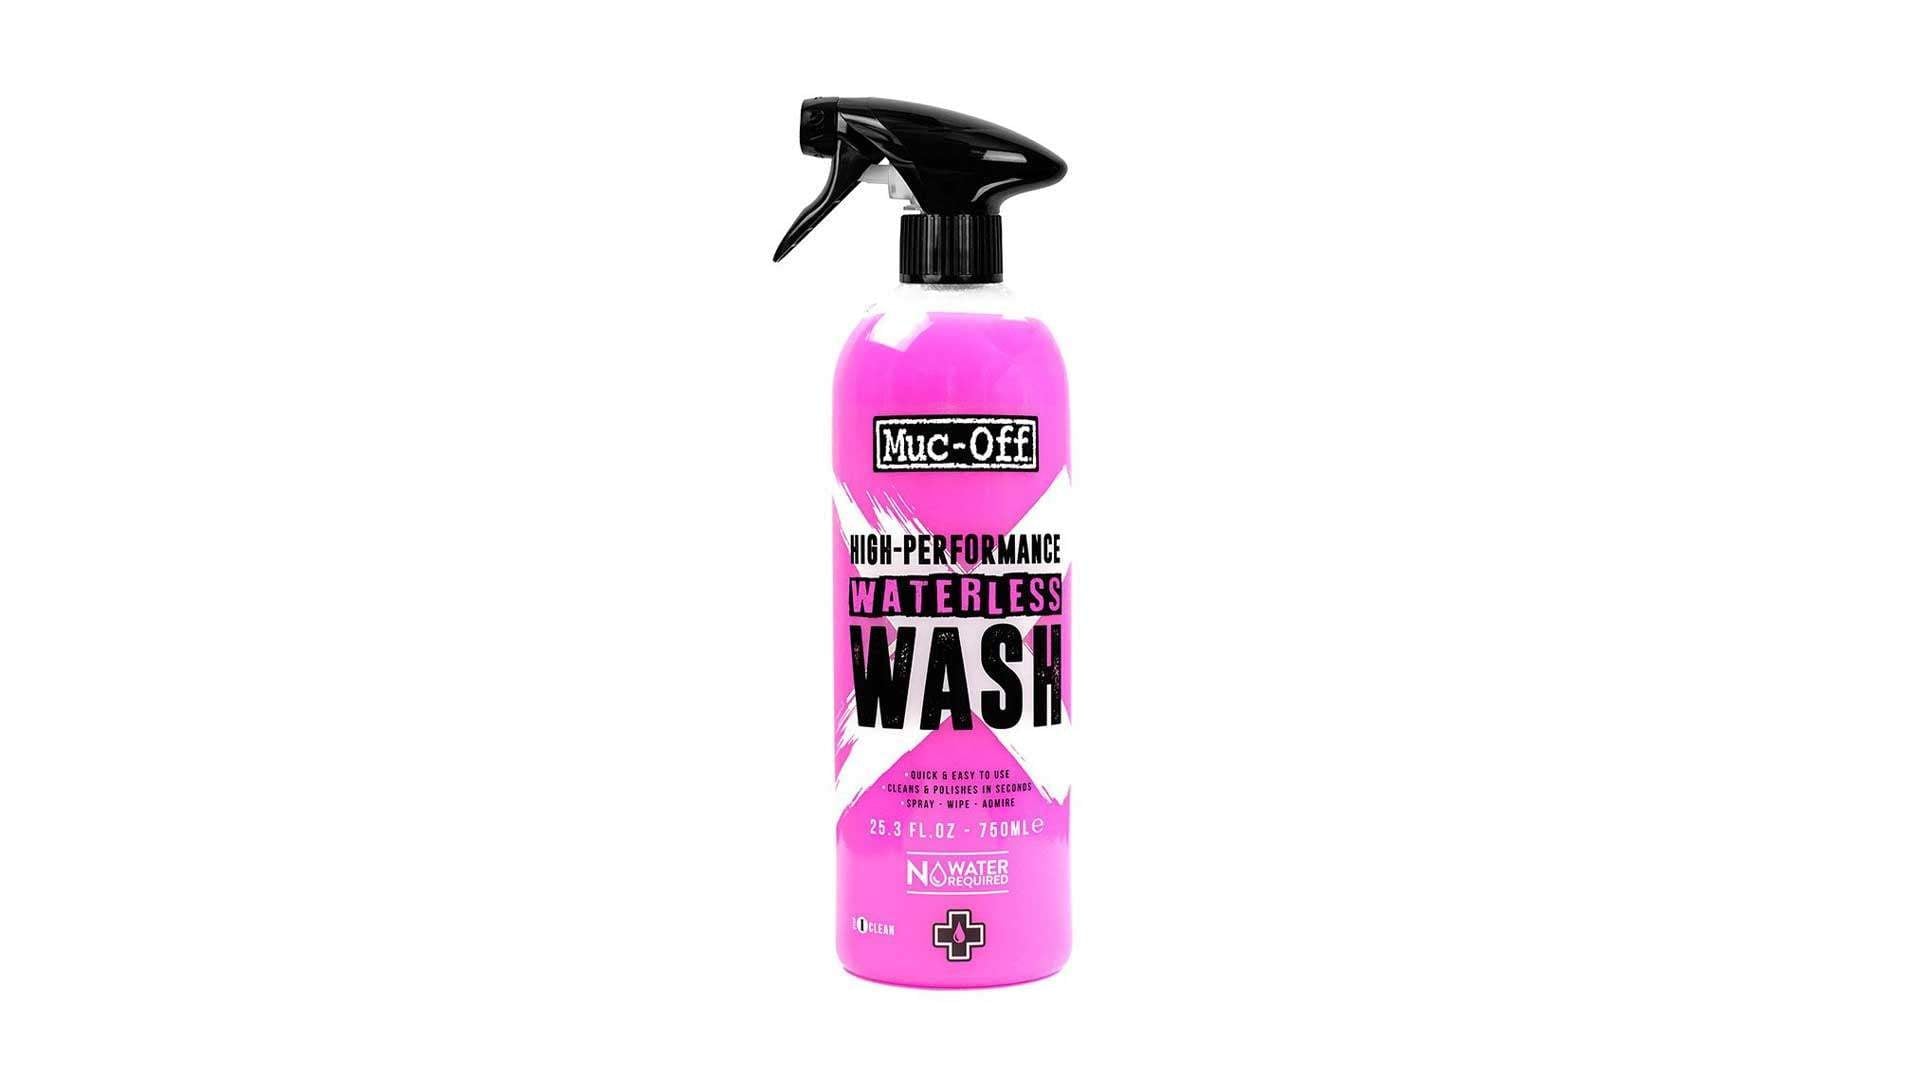 Muc-Off 20093US Ultimate Motorcycle Cleaning Kit